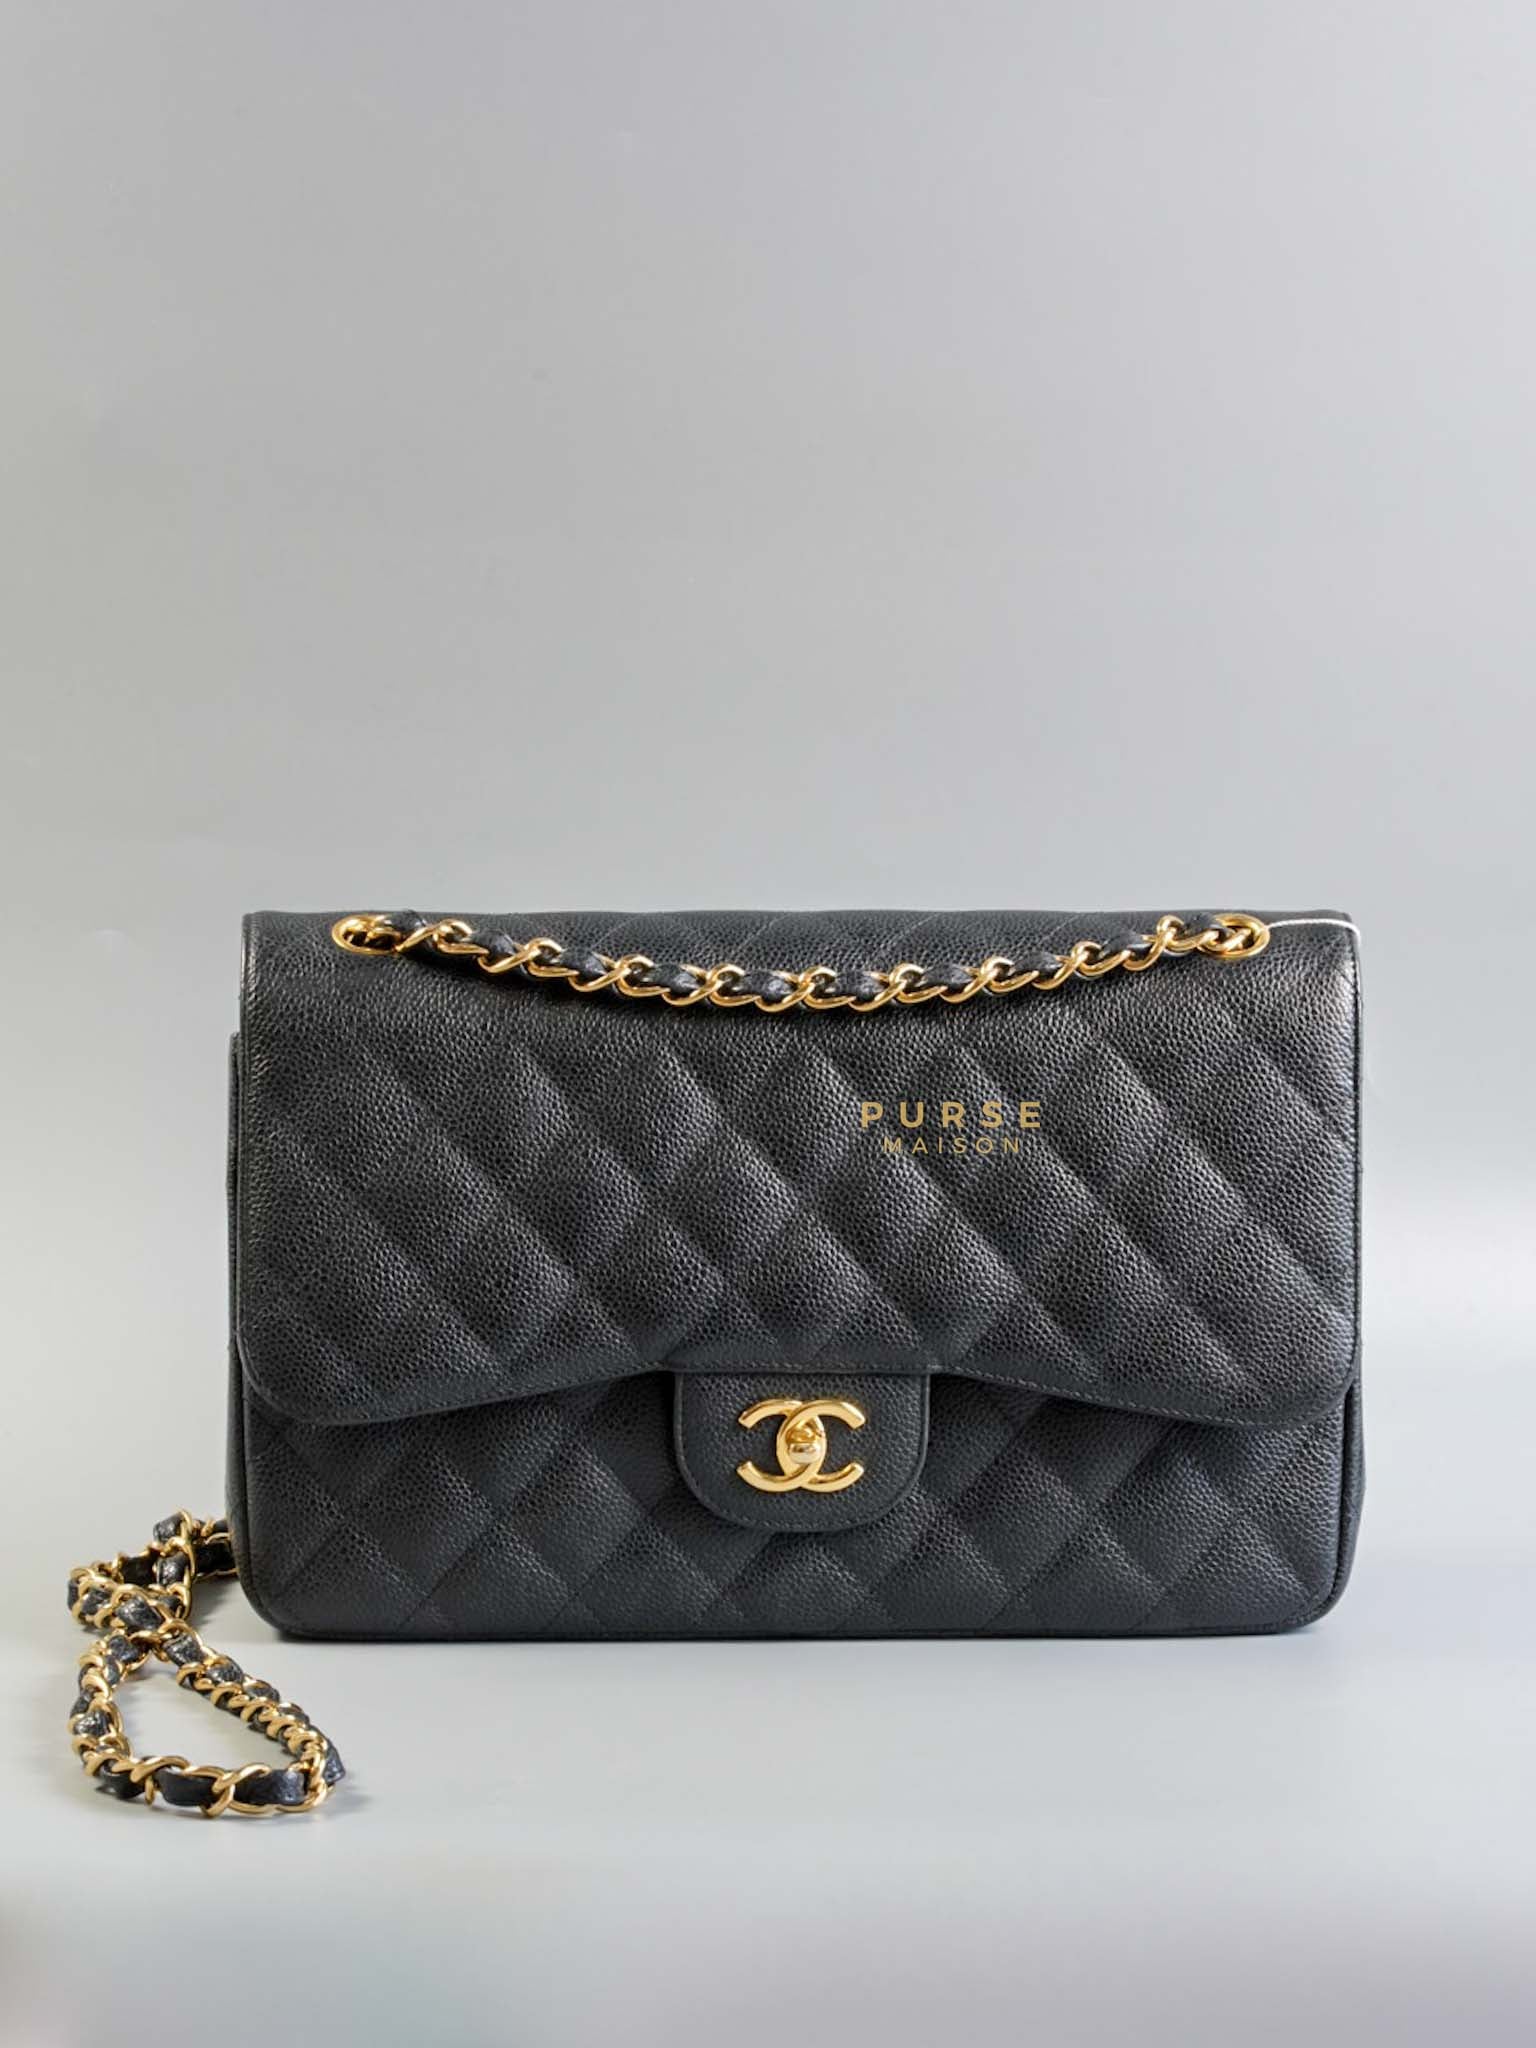 Chanel Classic Double Flap Jumbo in Black Caviar and Gold Hardware (Series 15) | Purse Maison Luxury Bags Shop